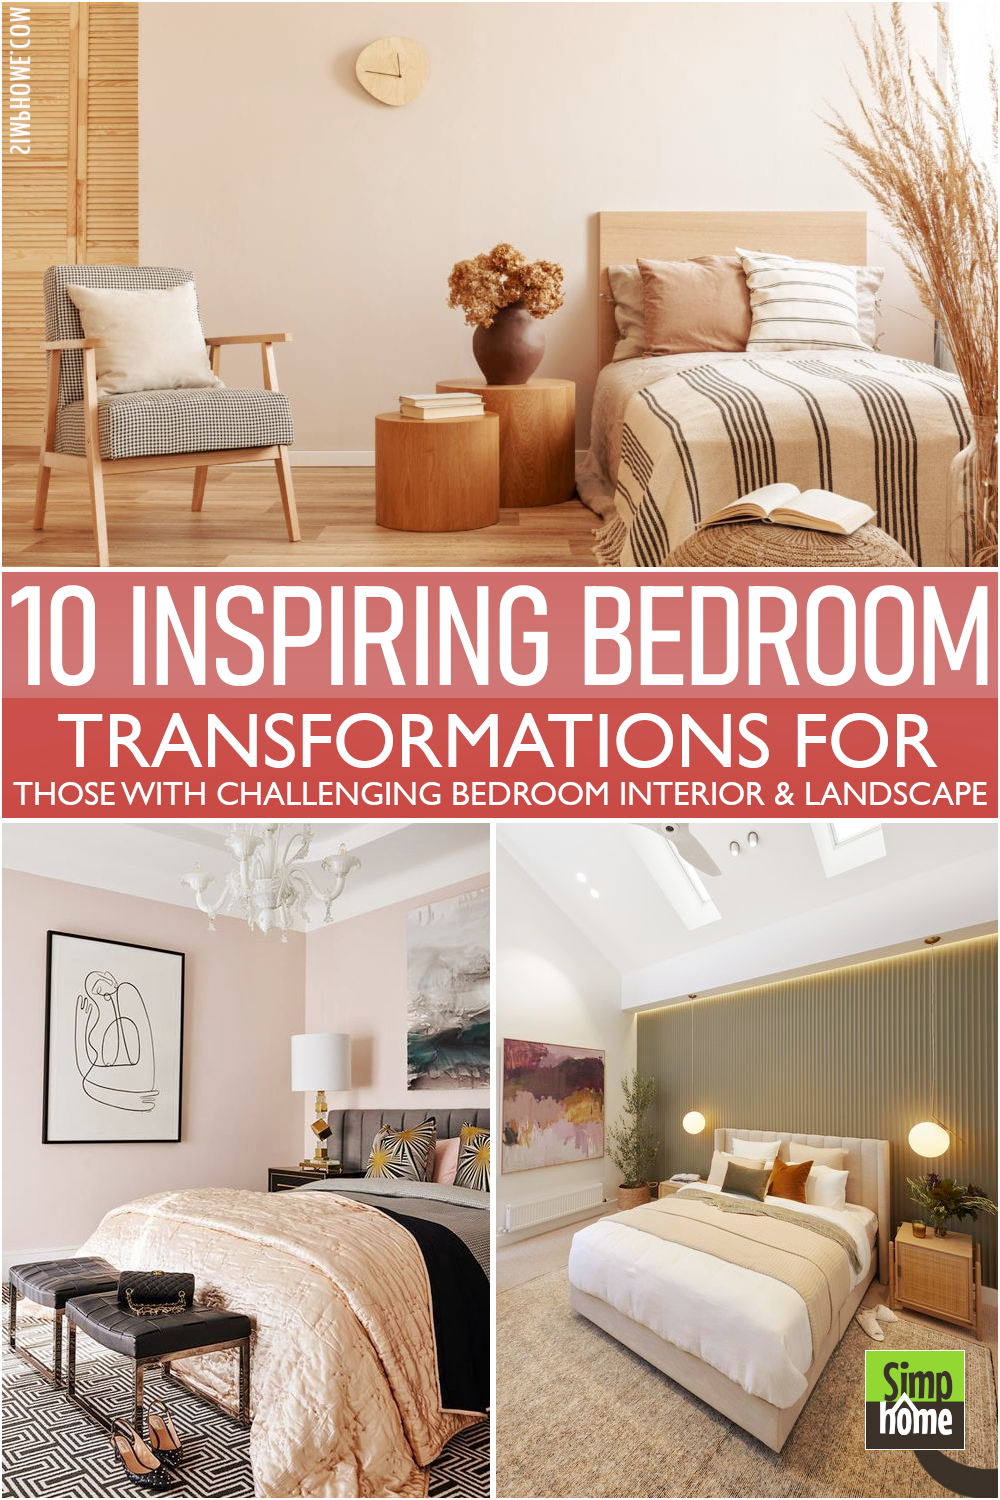 This is 10 Bedroom Interior Transformations list